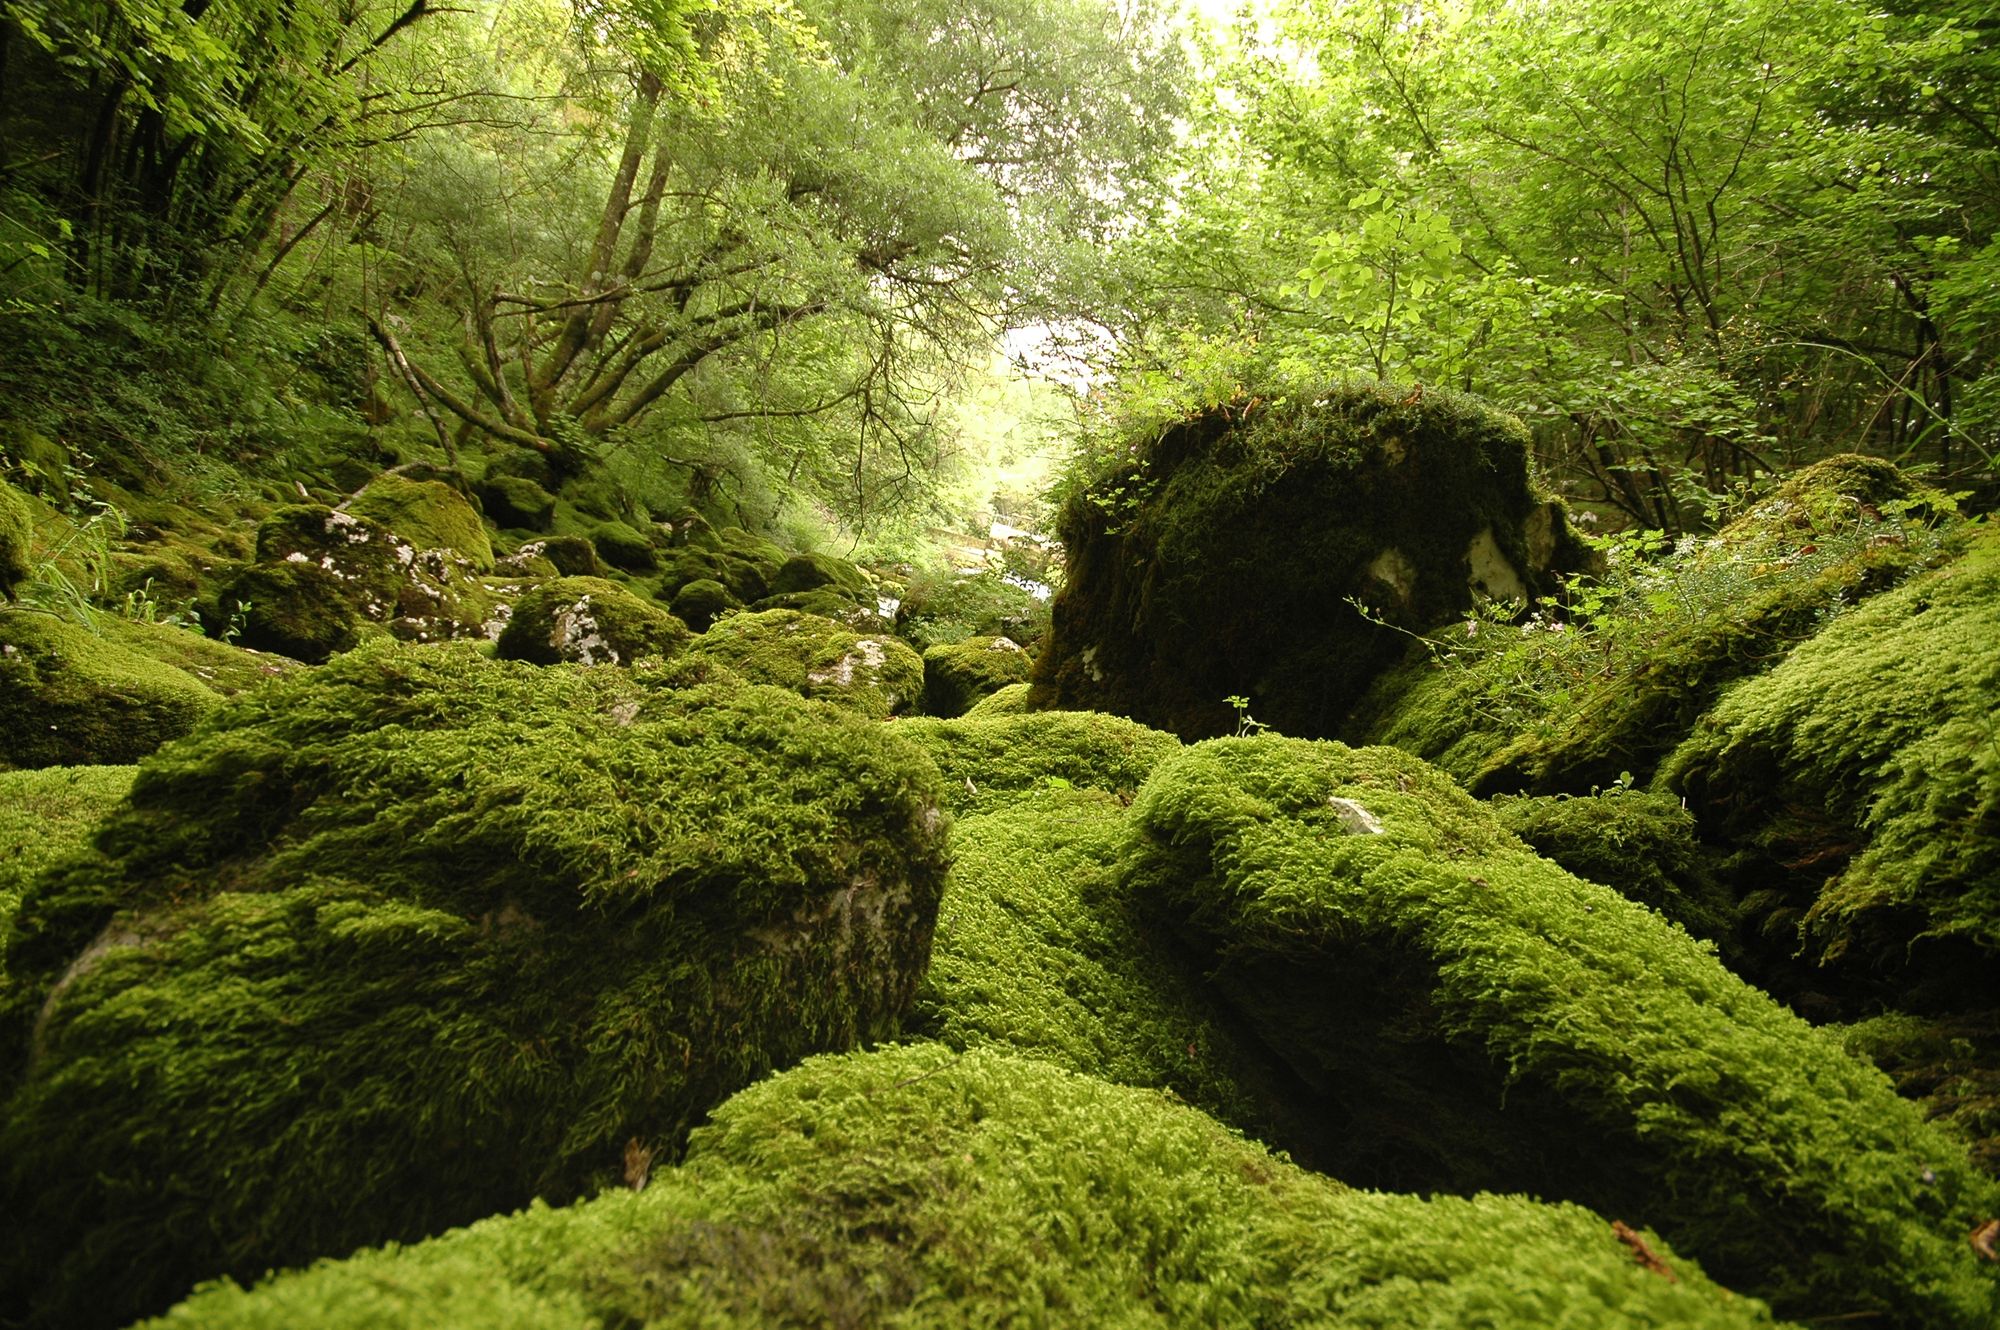 Mossy stones on the trail. Photo: Getty